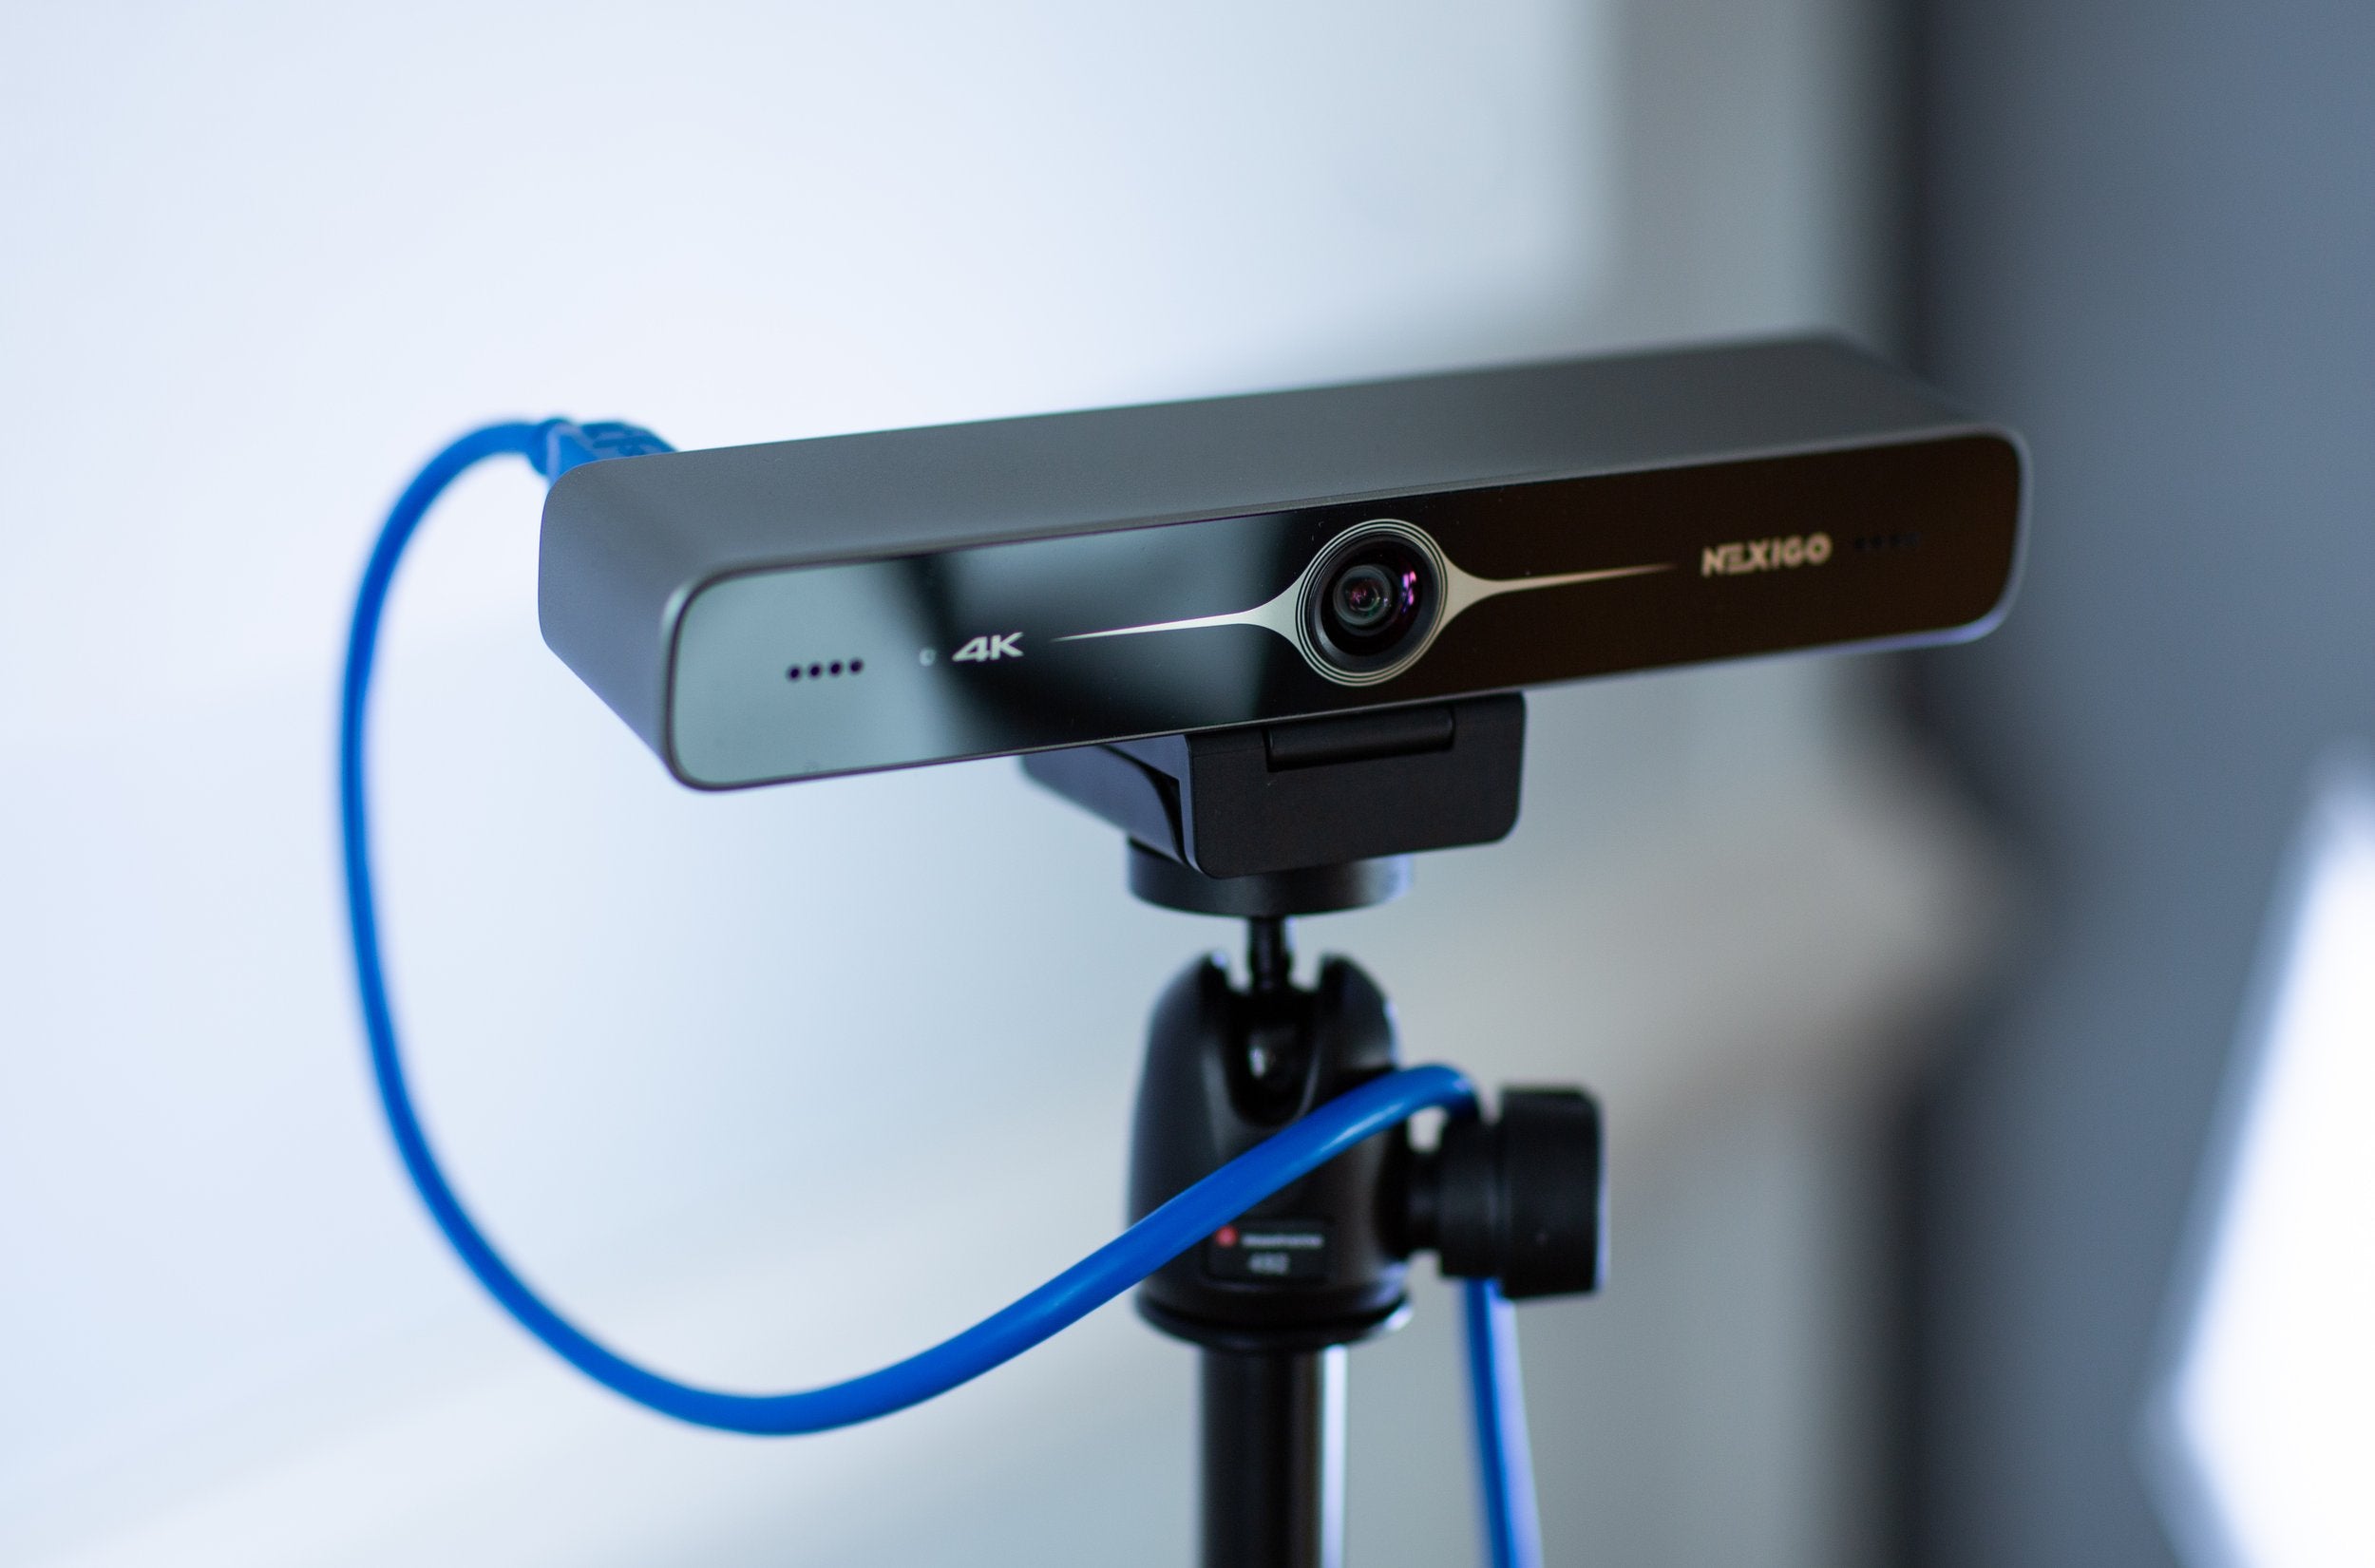 Extend your webcam USB cable for seamless video conference